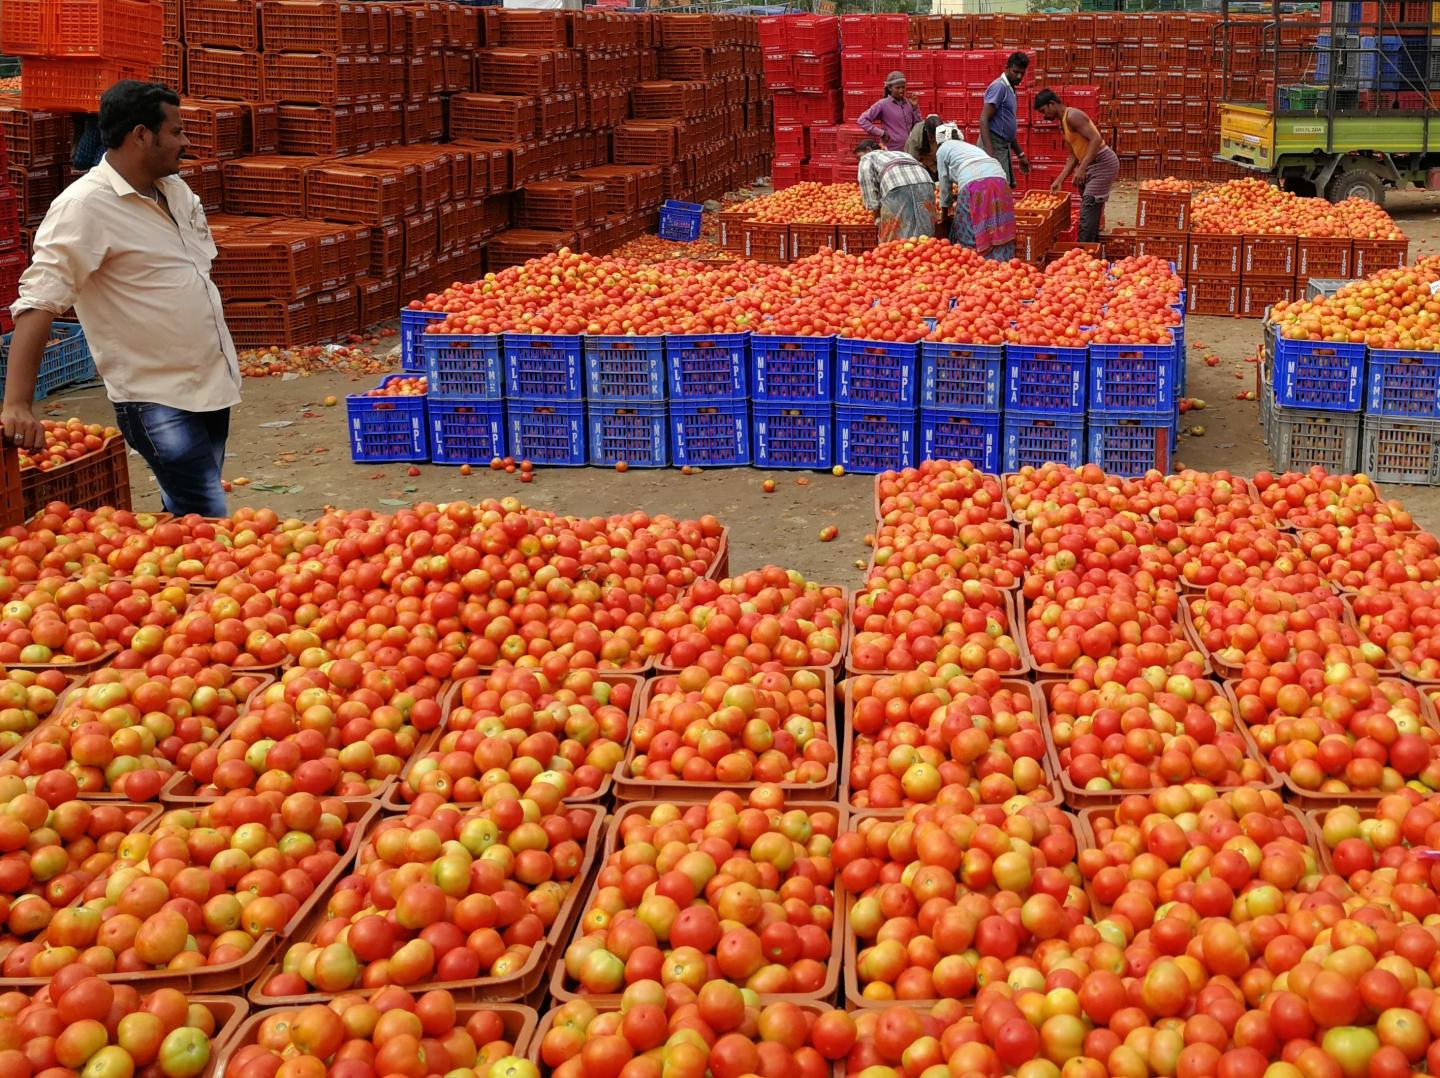 Hundreds of Boxes of Tomatoes in a Market